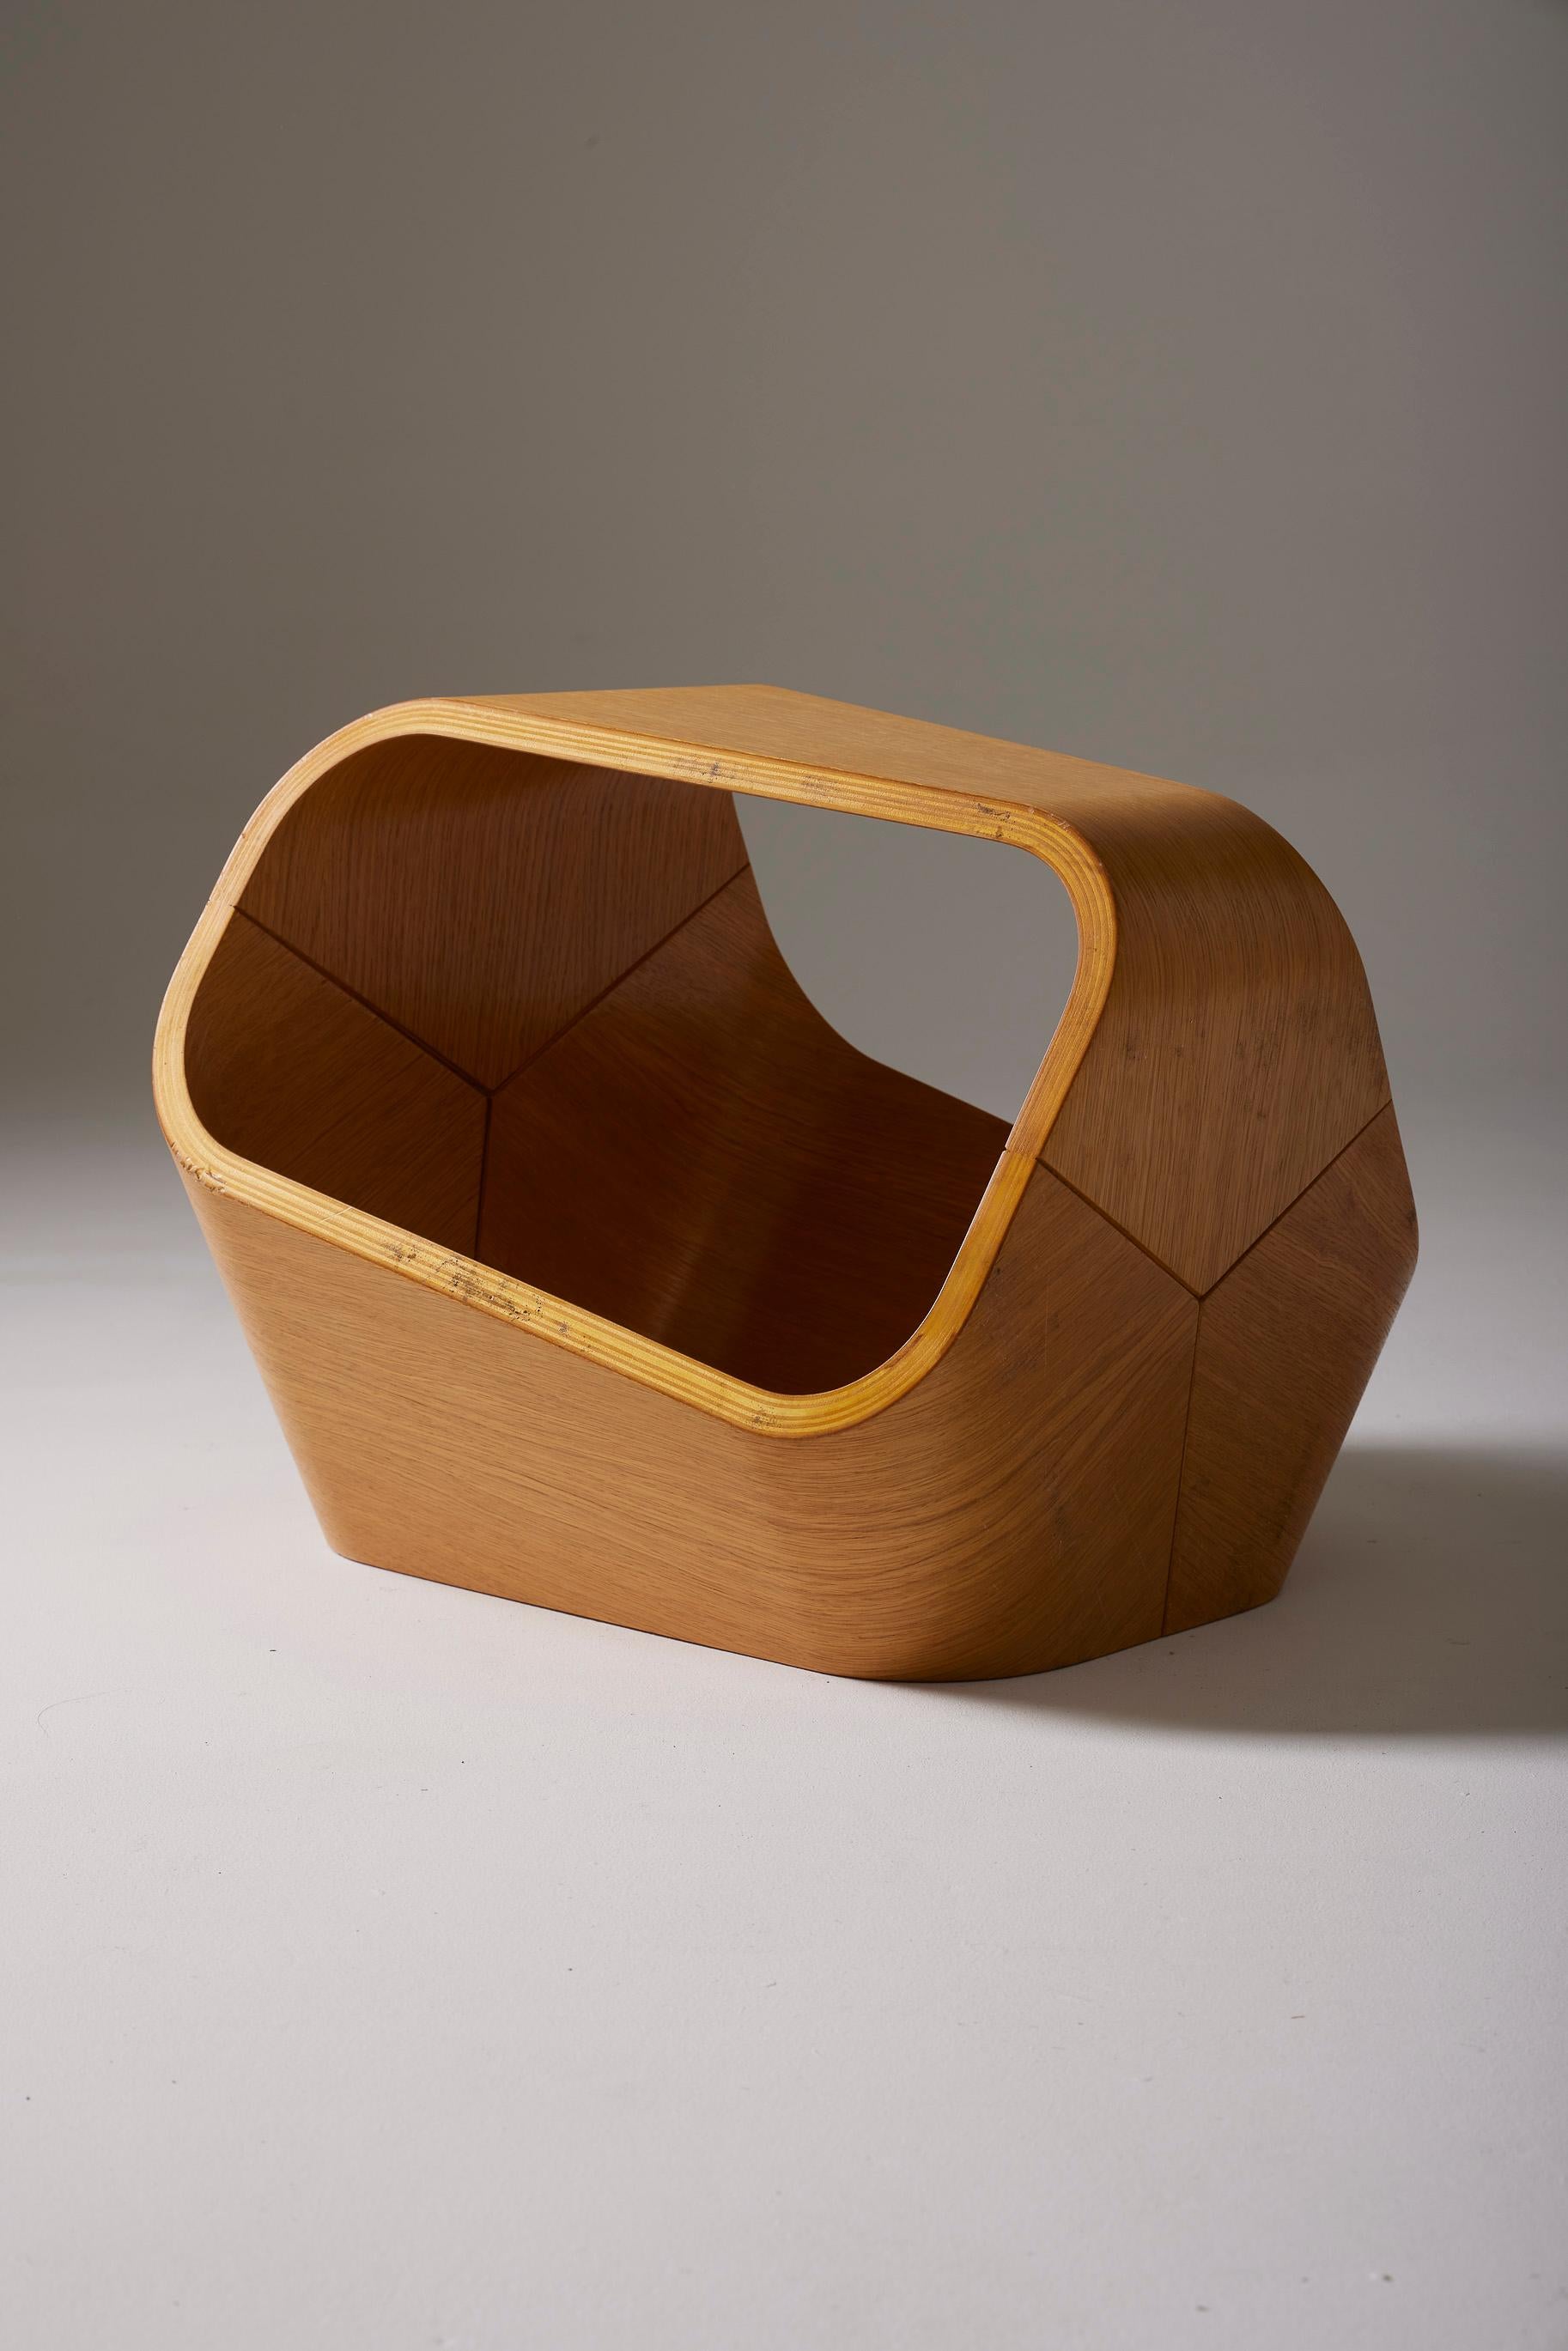 Wooden stool by Enrico Cesana For Sale 4